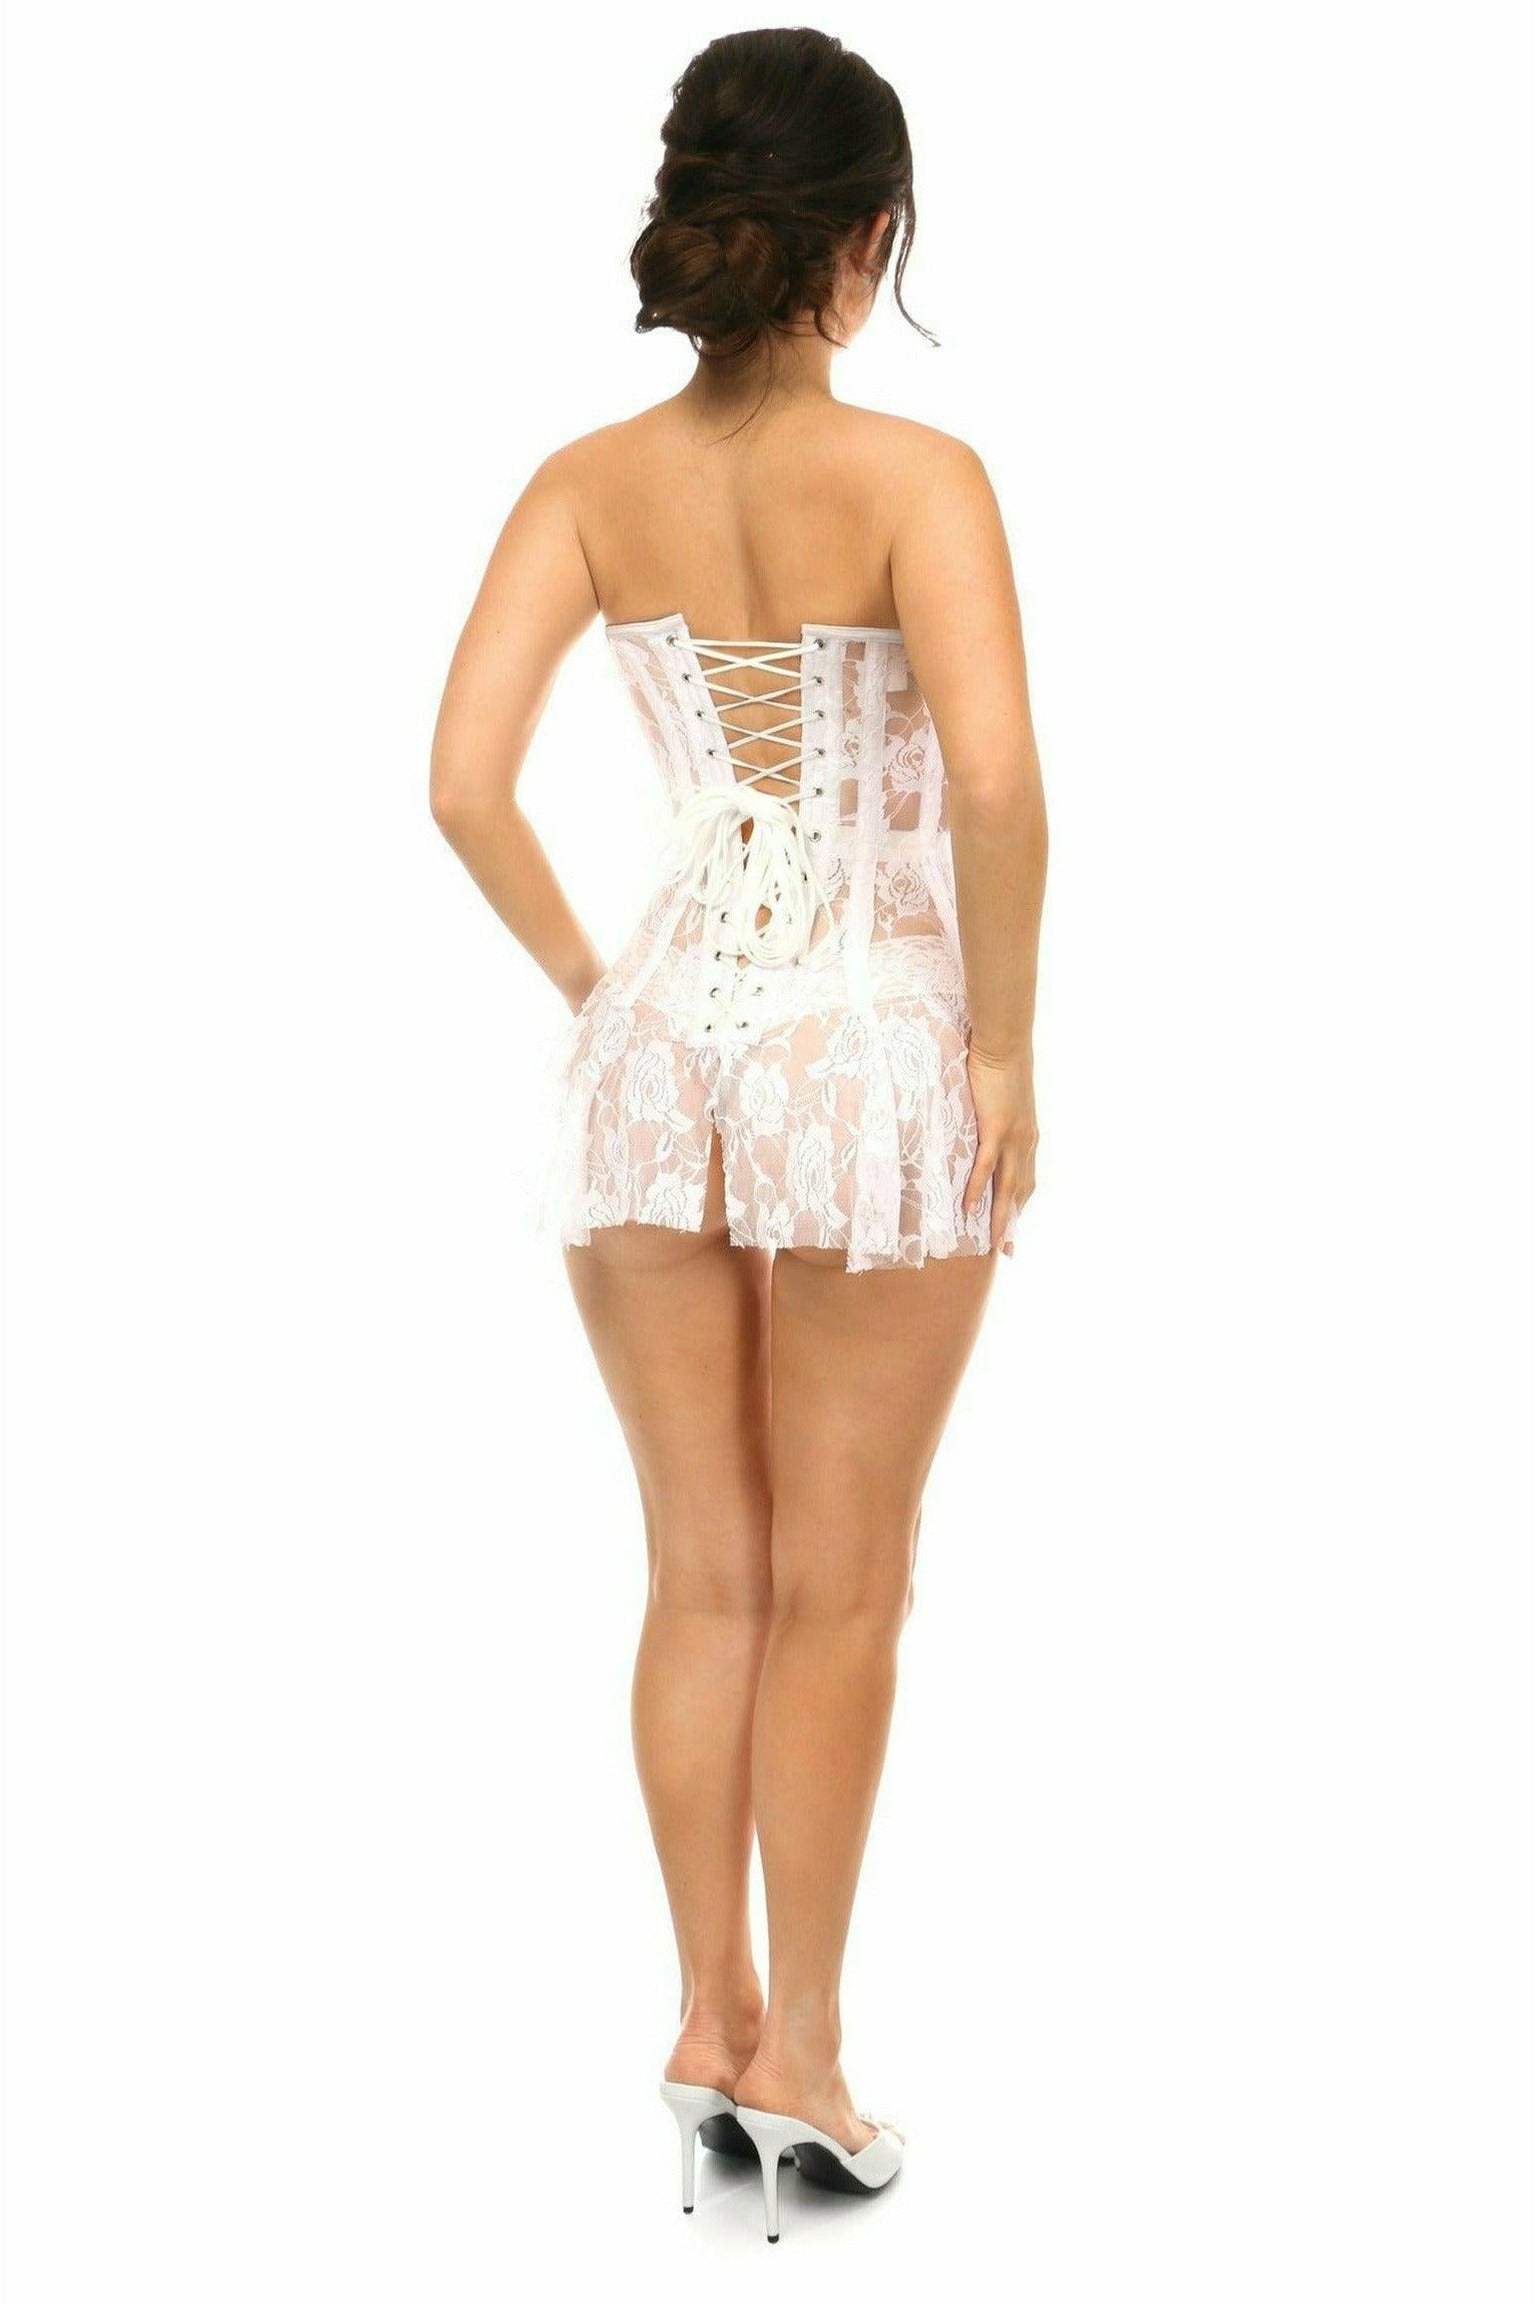 Lavish Sheer Lace Over Bust Corsets In White- Daisy Corsets